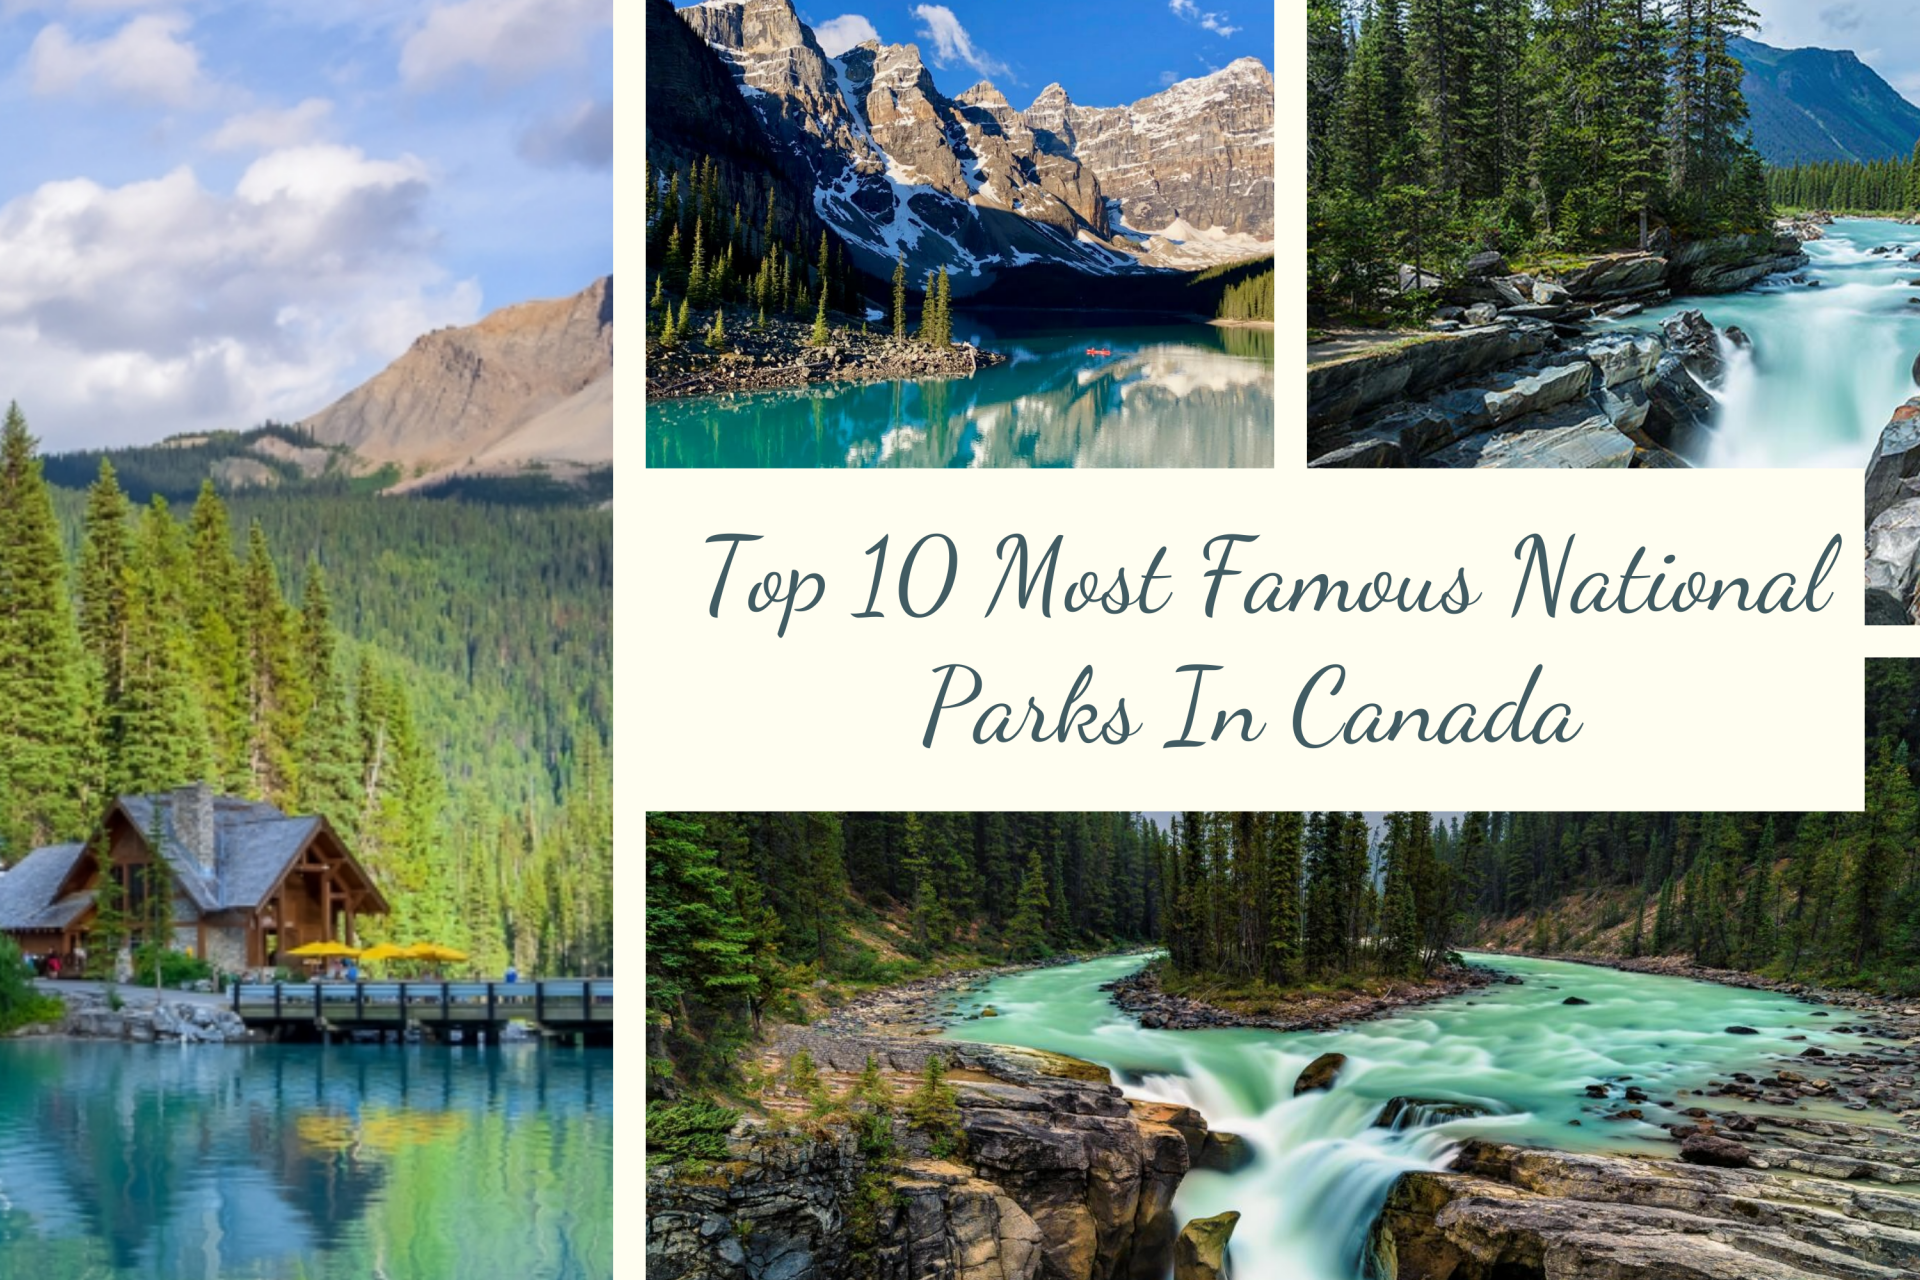 Top 10 Most Famous National Parks In Canada